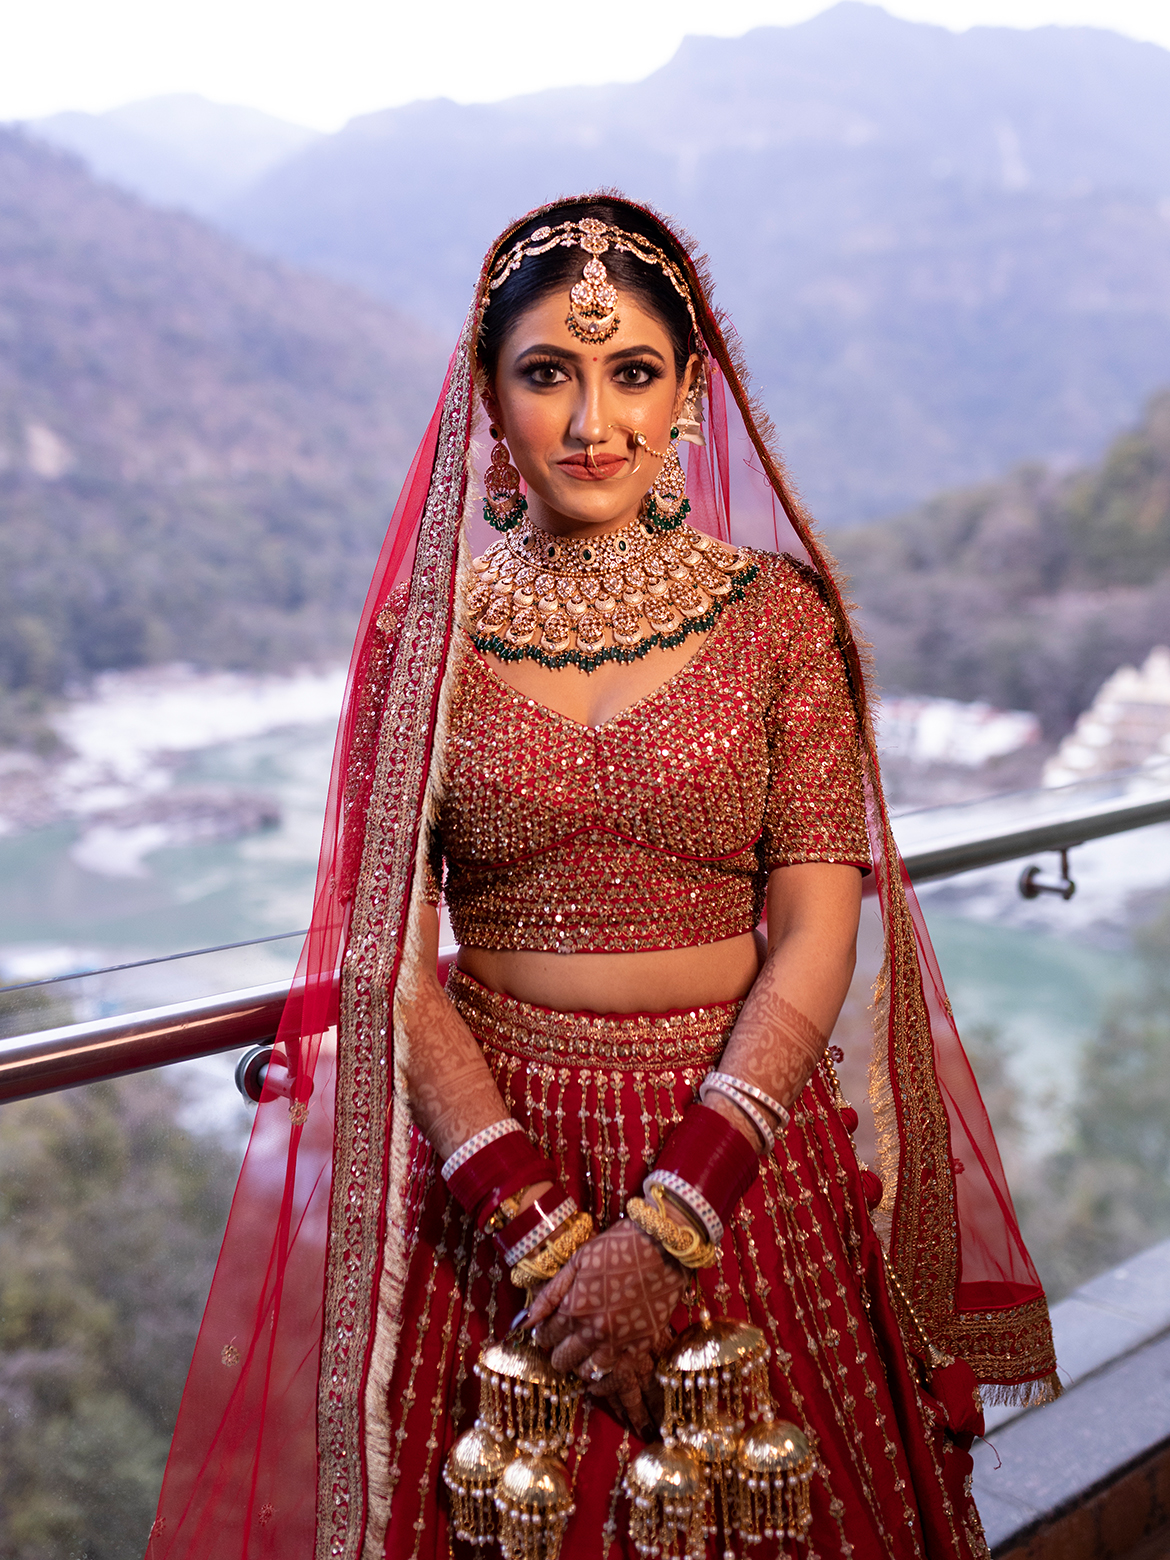 Top 7 Bridal Makeup Looks For The Indian Bride - Styl Inc